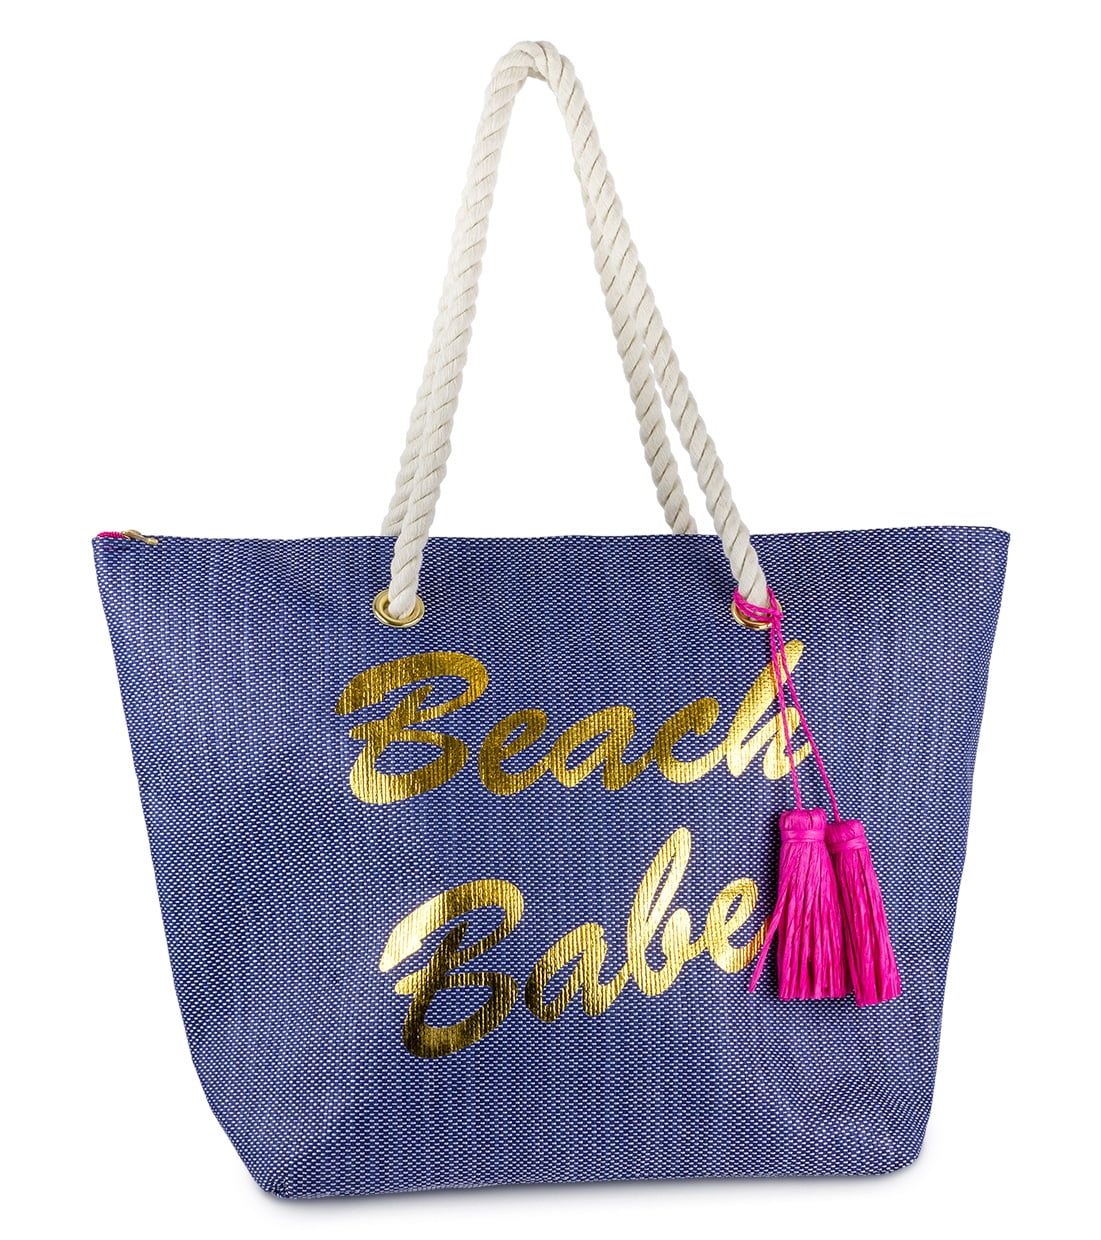 WOMEN'S BEACH BABE STRAW BEACH TOTE BAG WITH TASSEL AND ROSE HANDLE ...